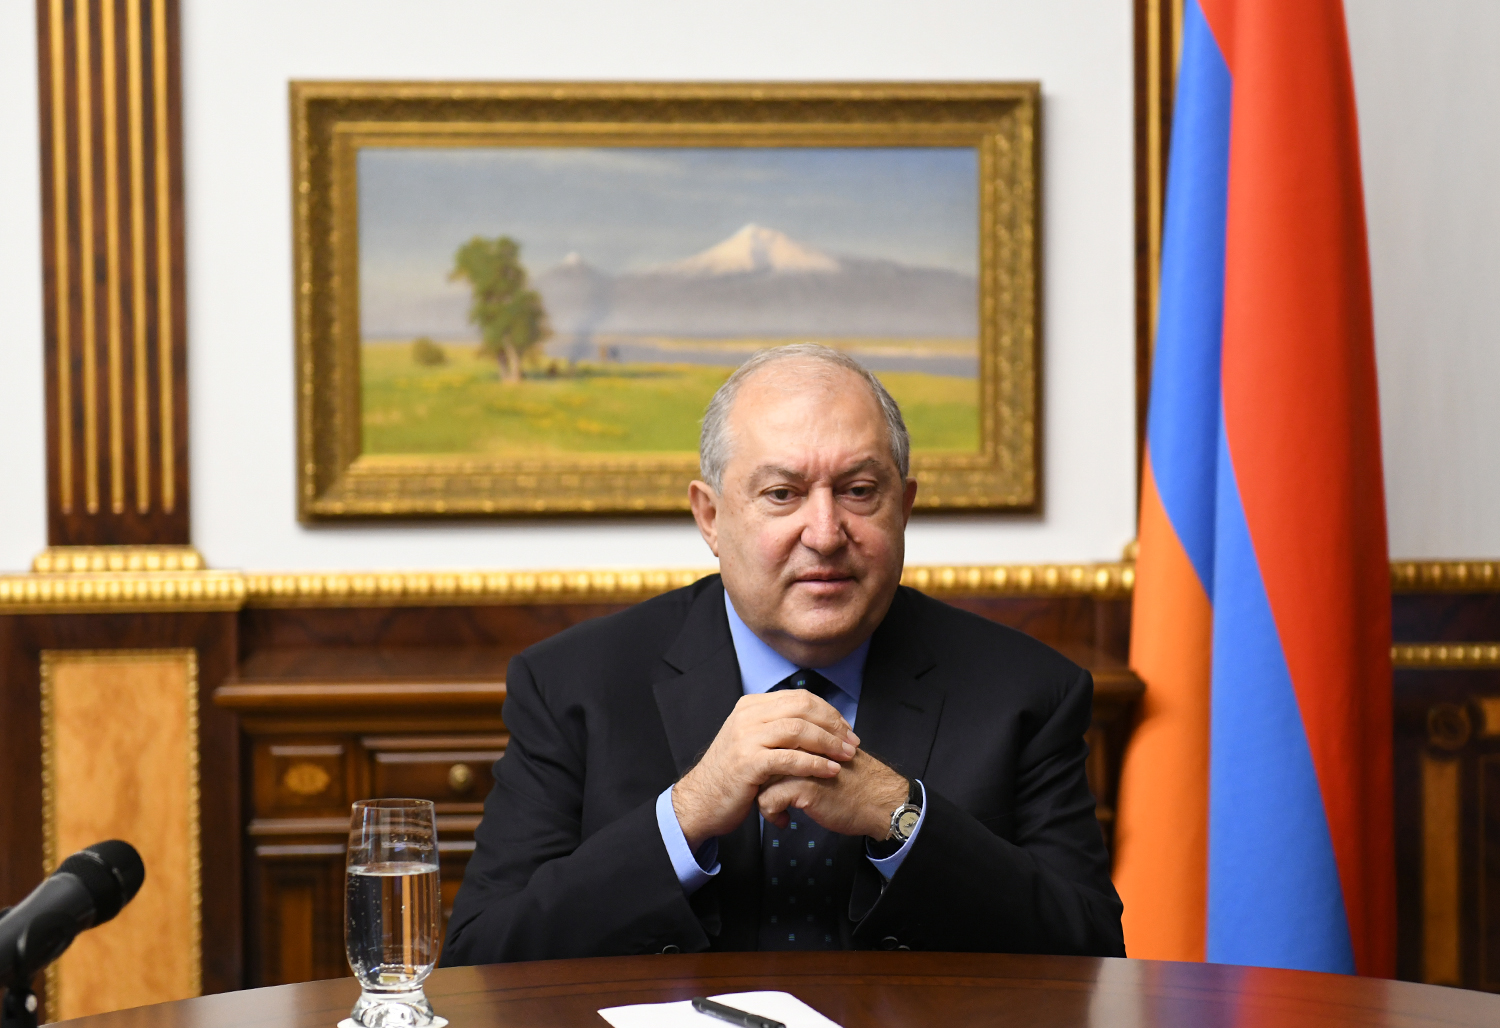 President Armen Sarkissian of Armenia has departed for Brussels where he is scheduled to have meetings with NATO Secretary General Jens Stoltenberg, High Representative of the European Union for Foreign Affairs and Security Policy Josep Borrell, President of the European Council Charles Michel and a number of other high level officials.